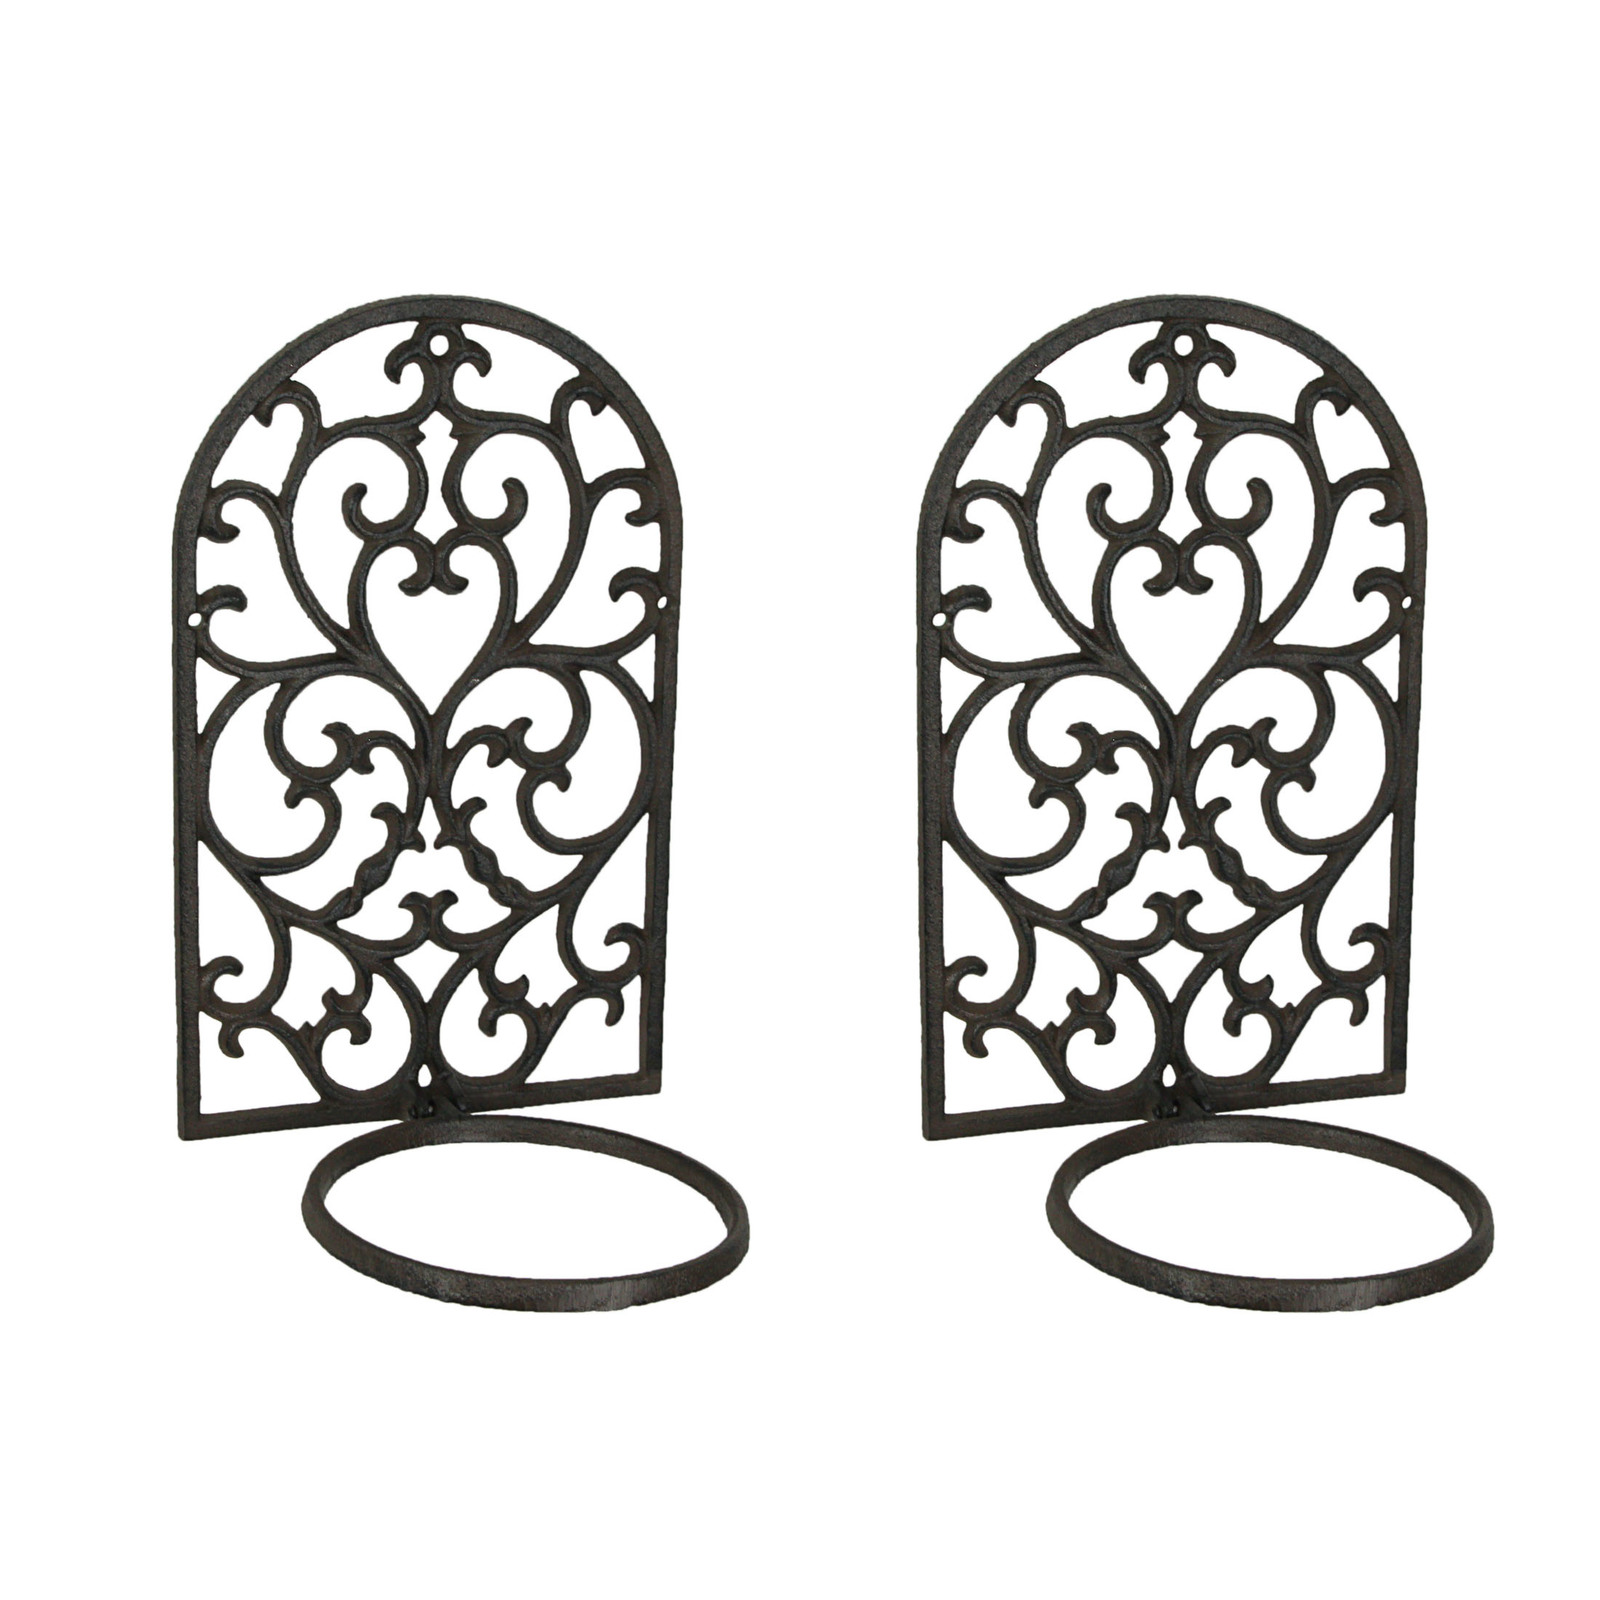 Primary image for Set of 2 Brown Cast Iron Wall Hanging Flower Pot Holder Mounted Planter Ring